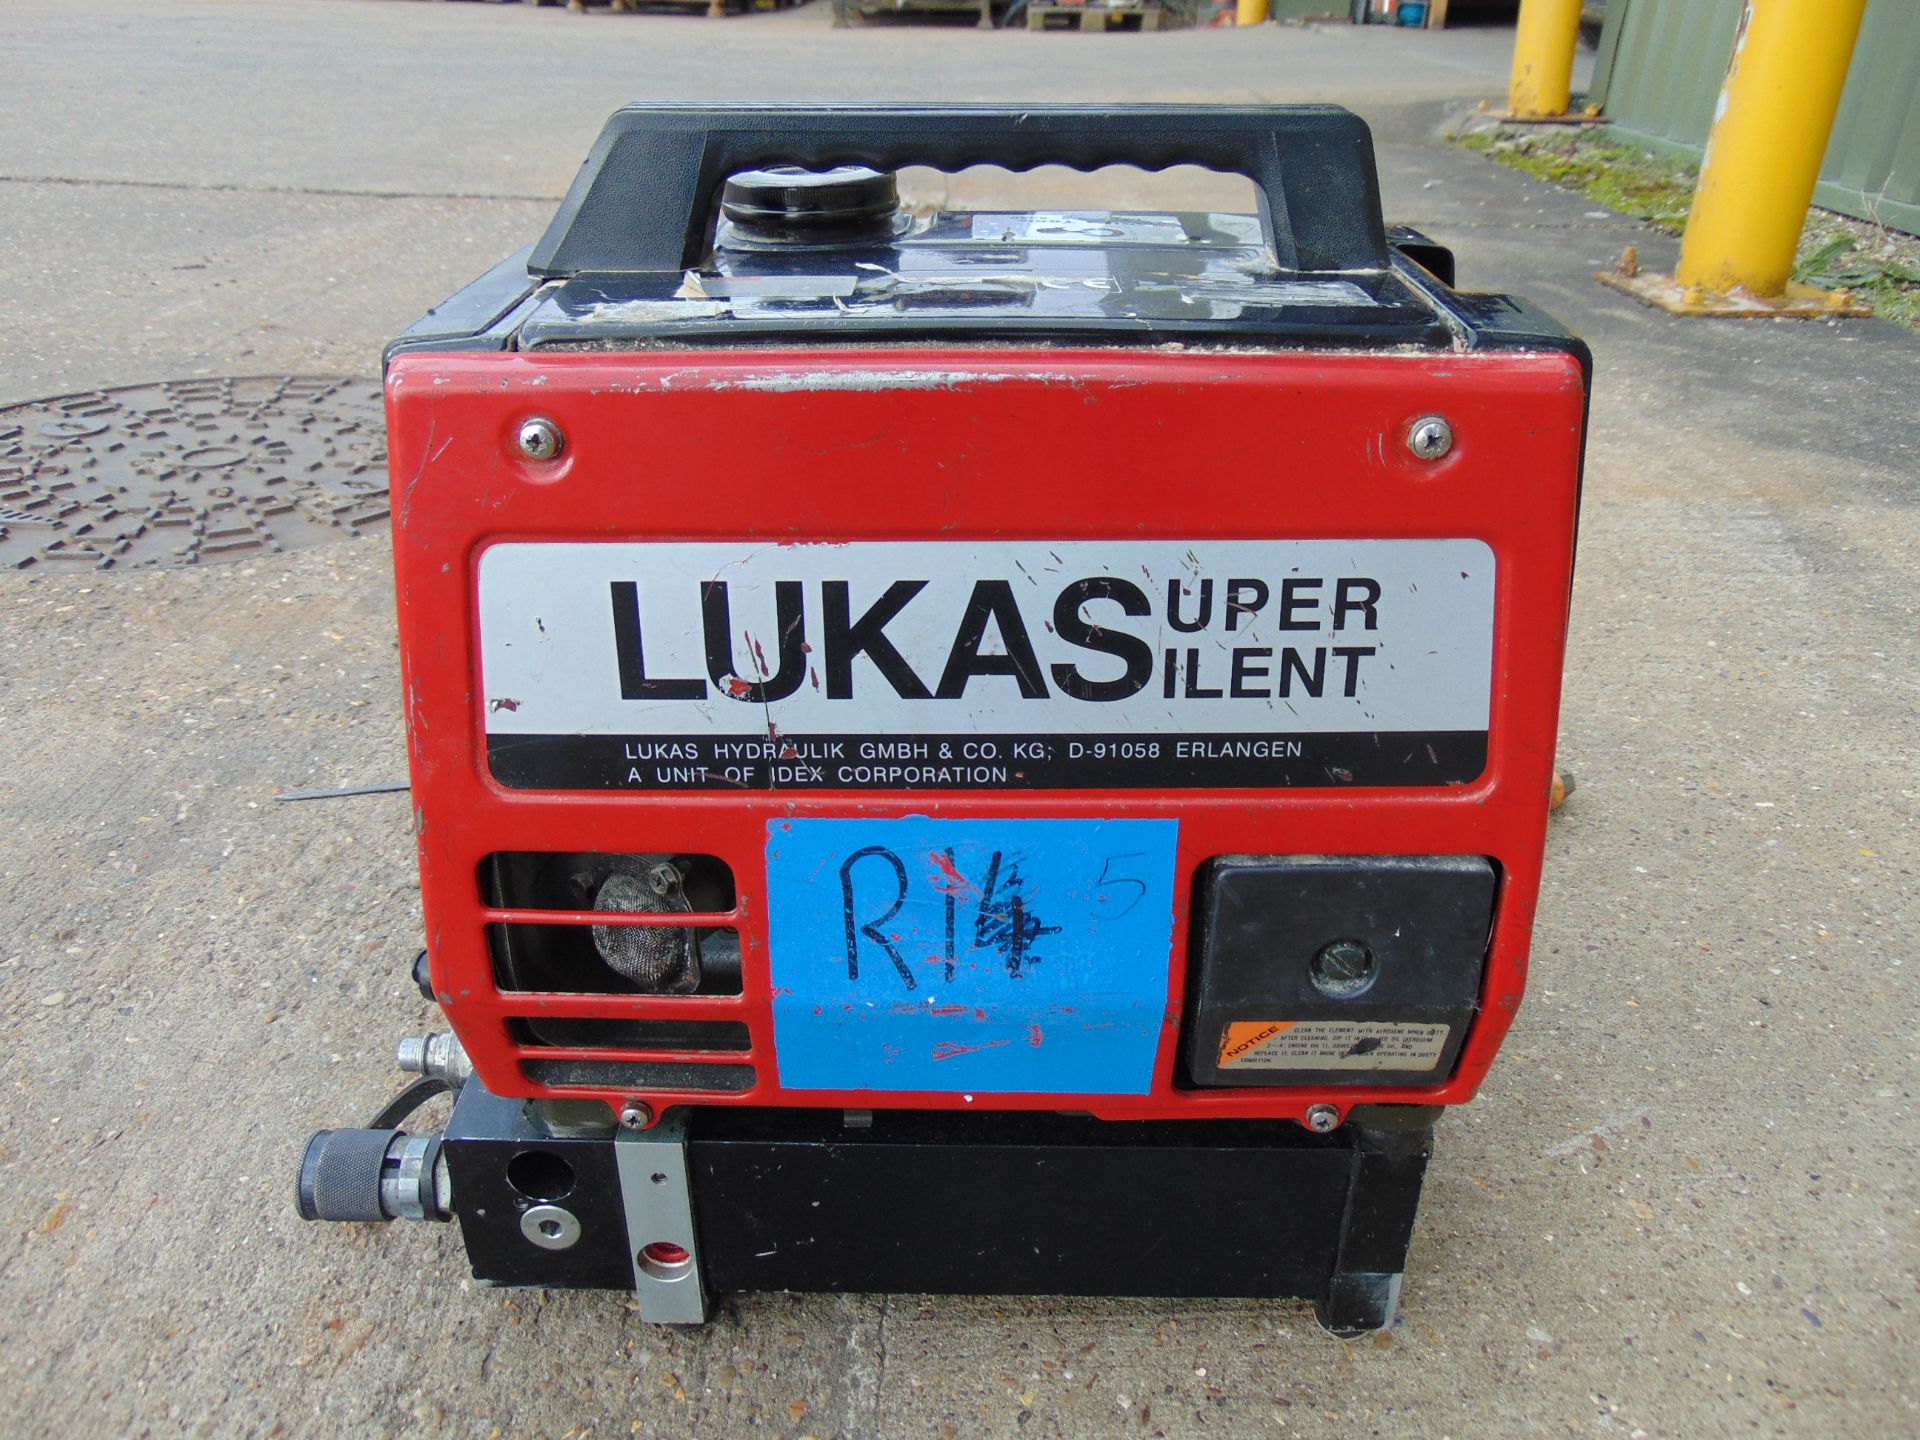 Lukas Super Silent Portable Hydraulic Power Pack - Image 3 of 8